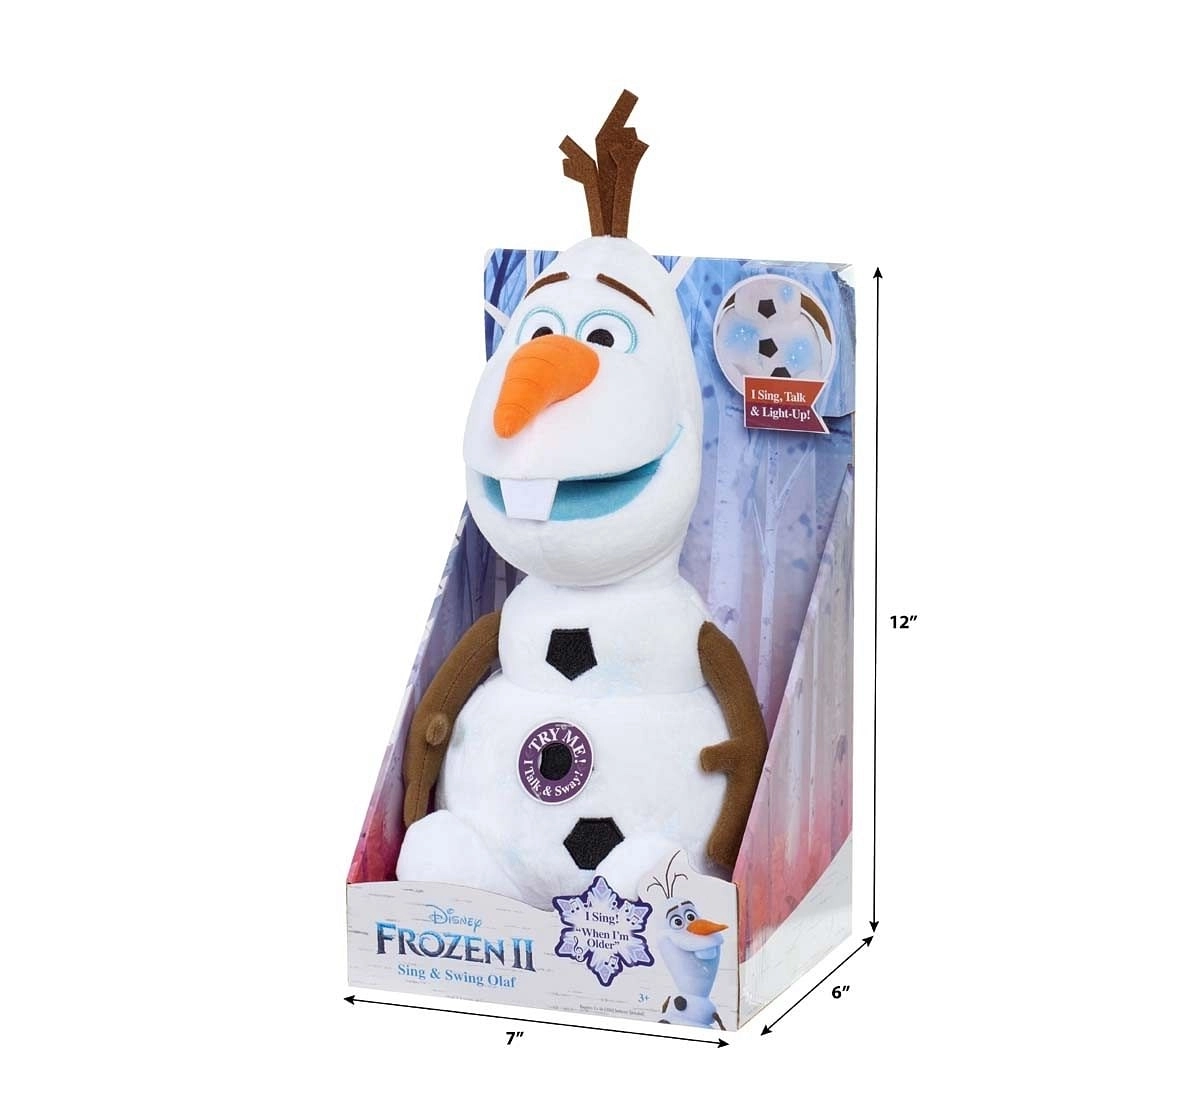 Disney Frozen 2 Sing & Swing Olaf Interactive Soft Toys for Age 3Y+ - 30.48 Cm